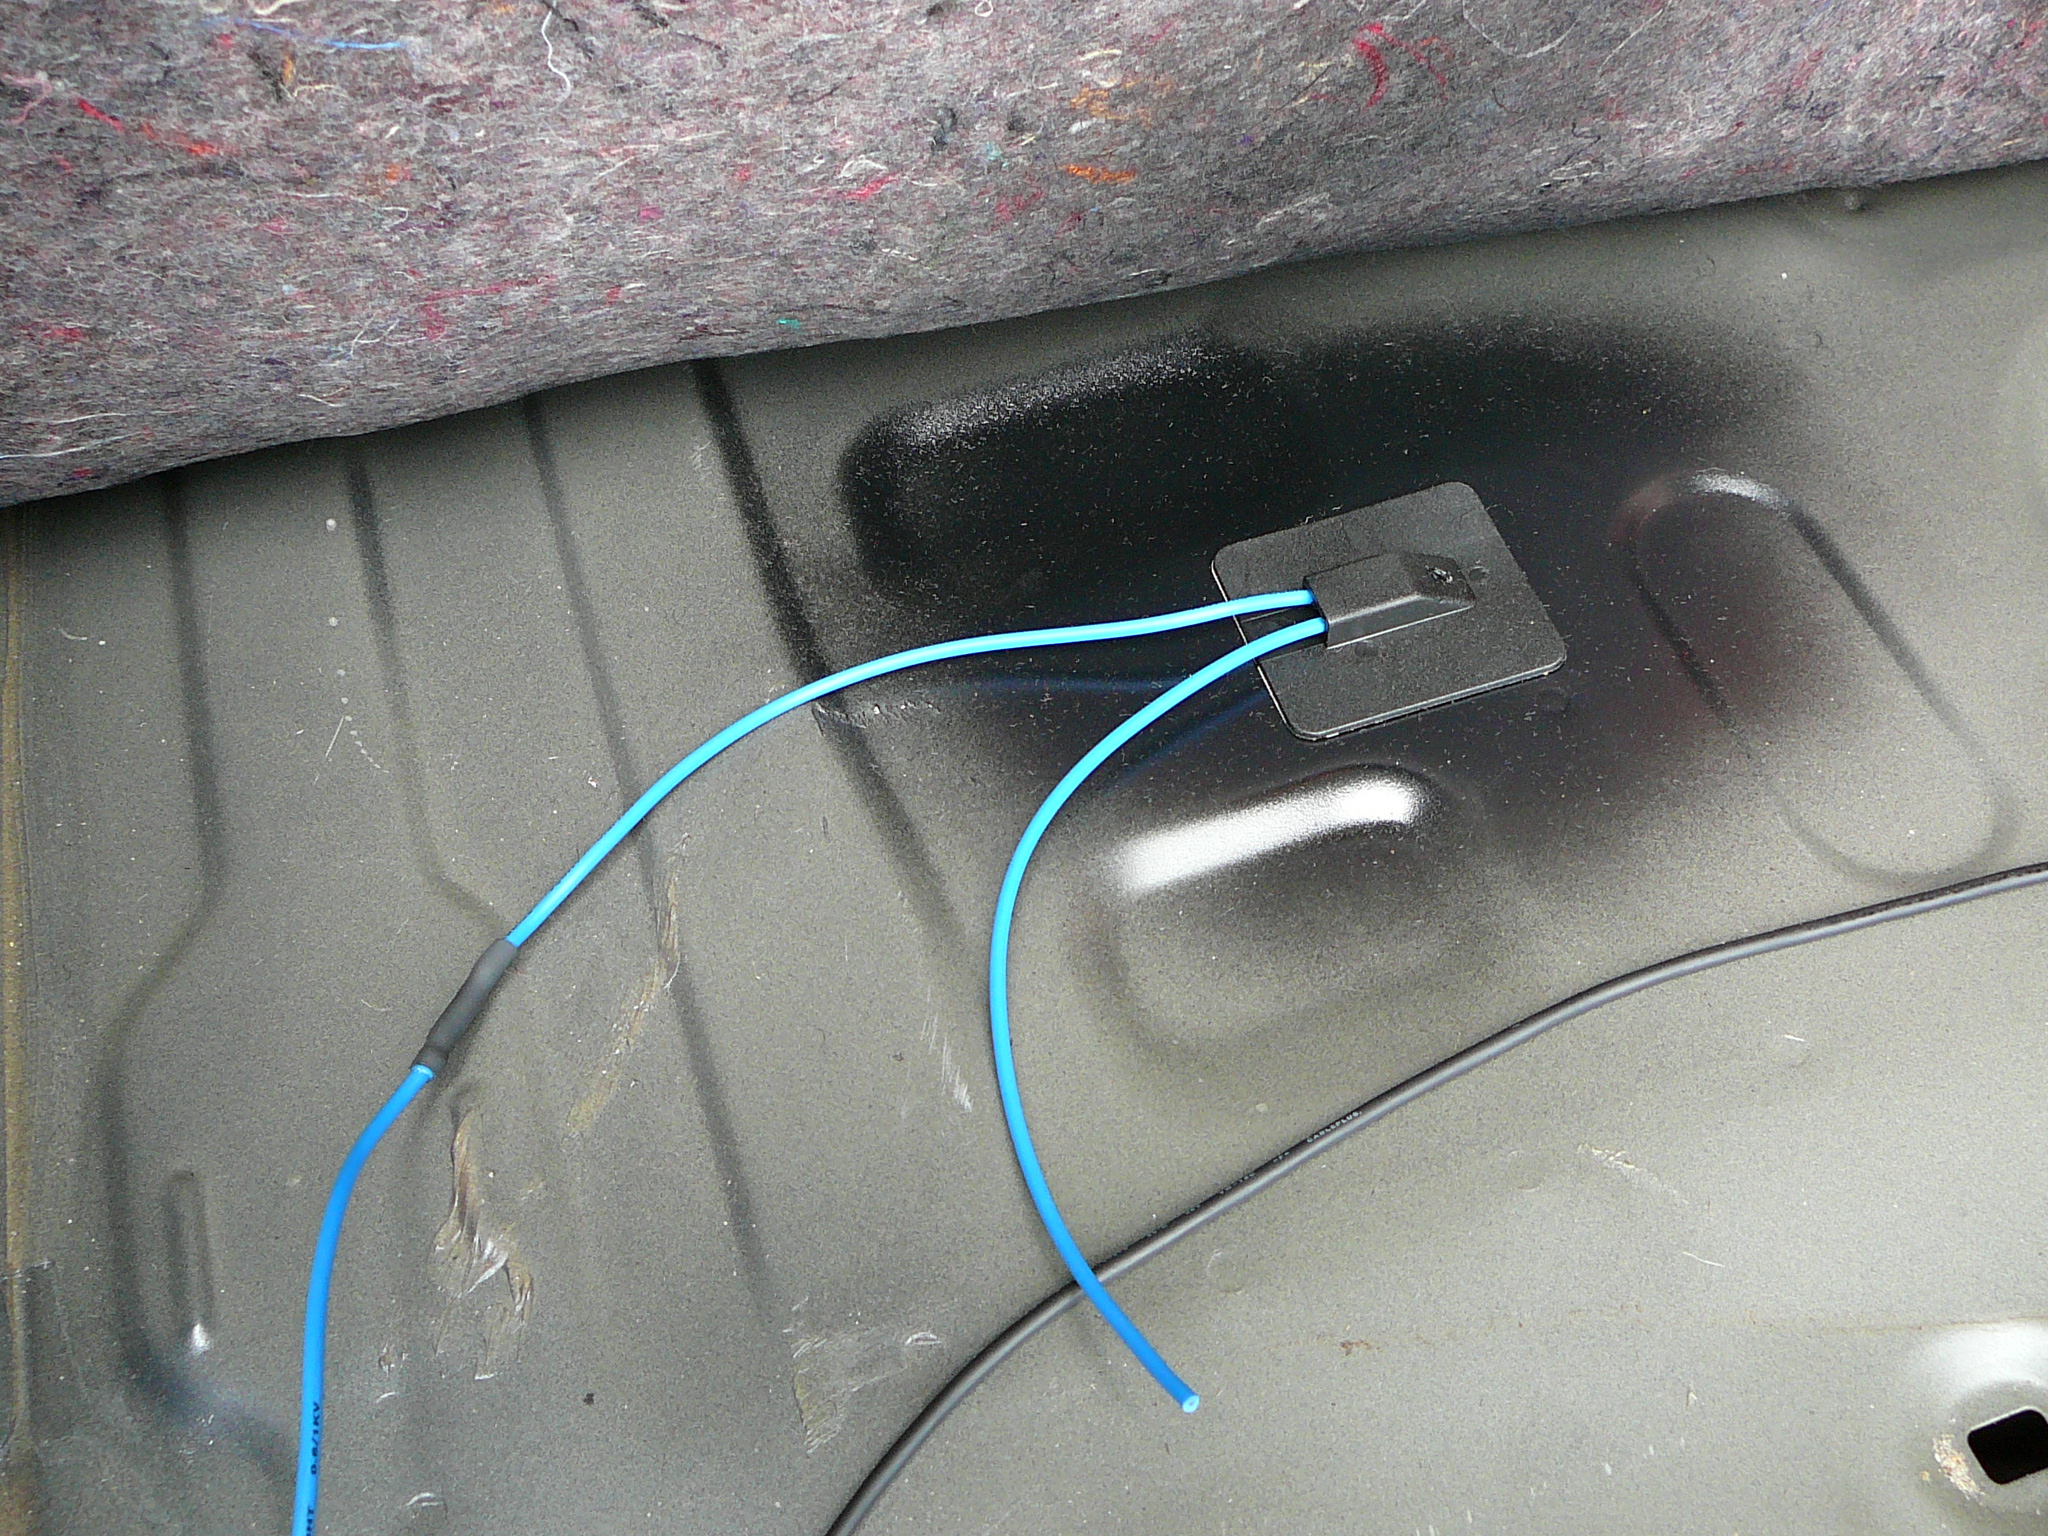 Toyota Prado with ERPS, Electronic Rust prevention system